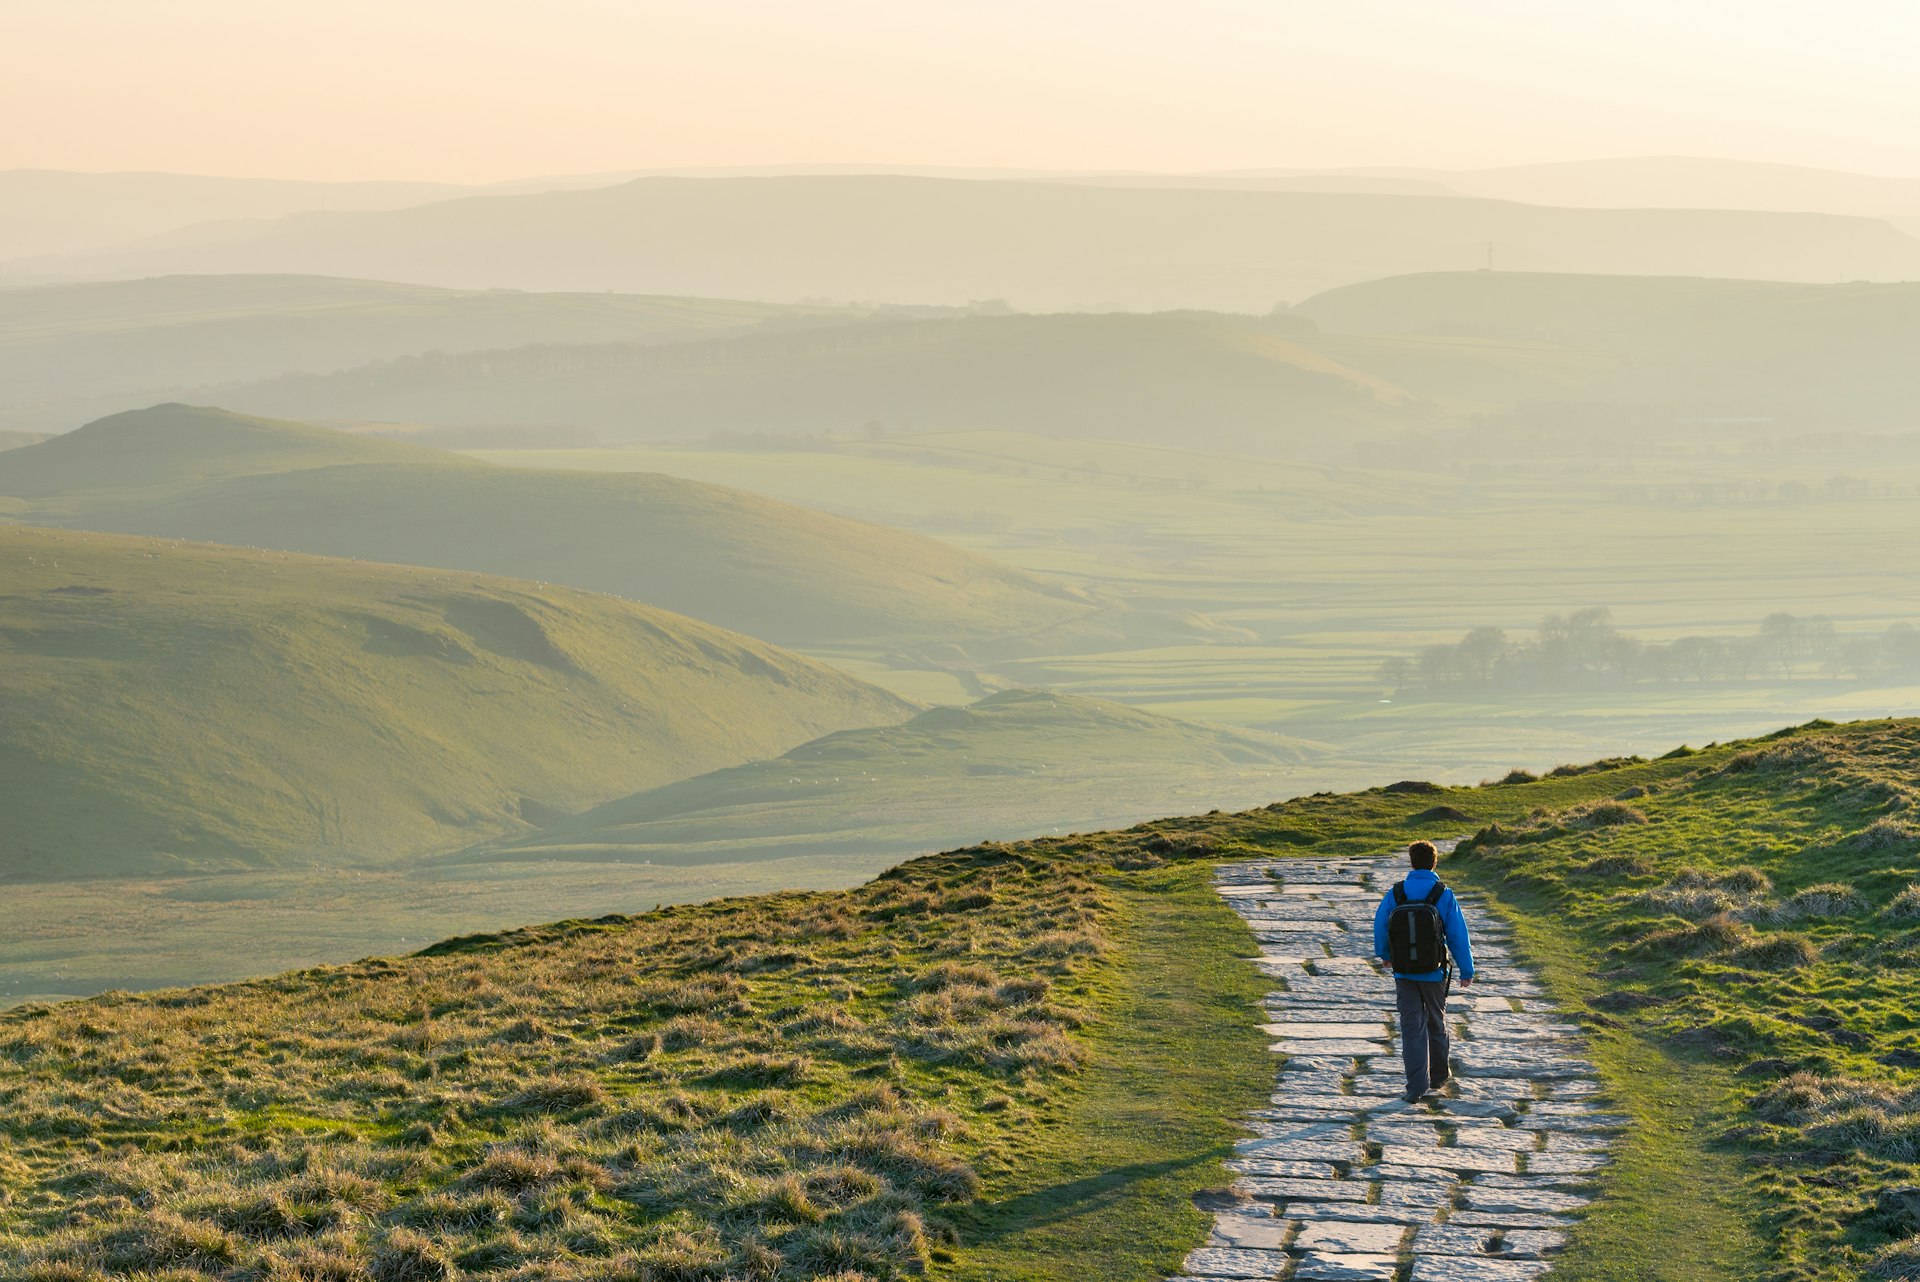 A hiker on the stone path at Mam Tor in Peak District National Park, England